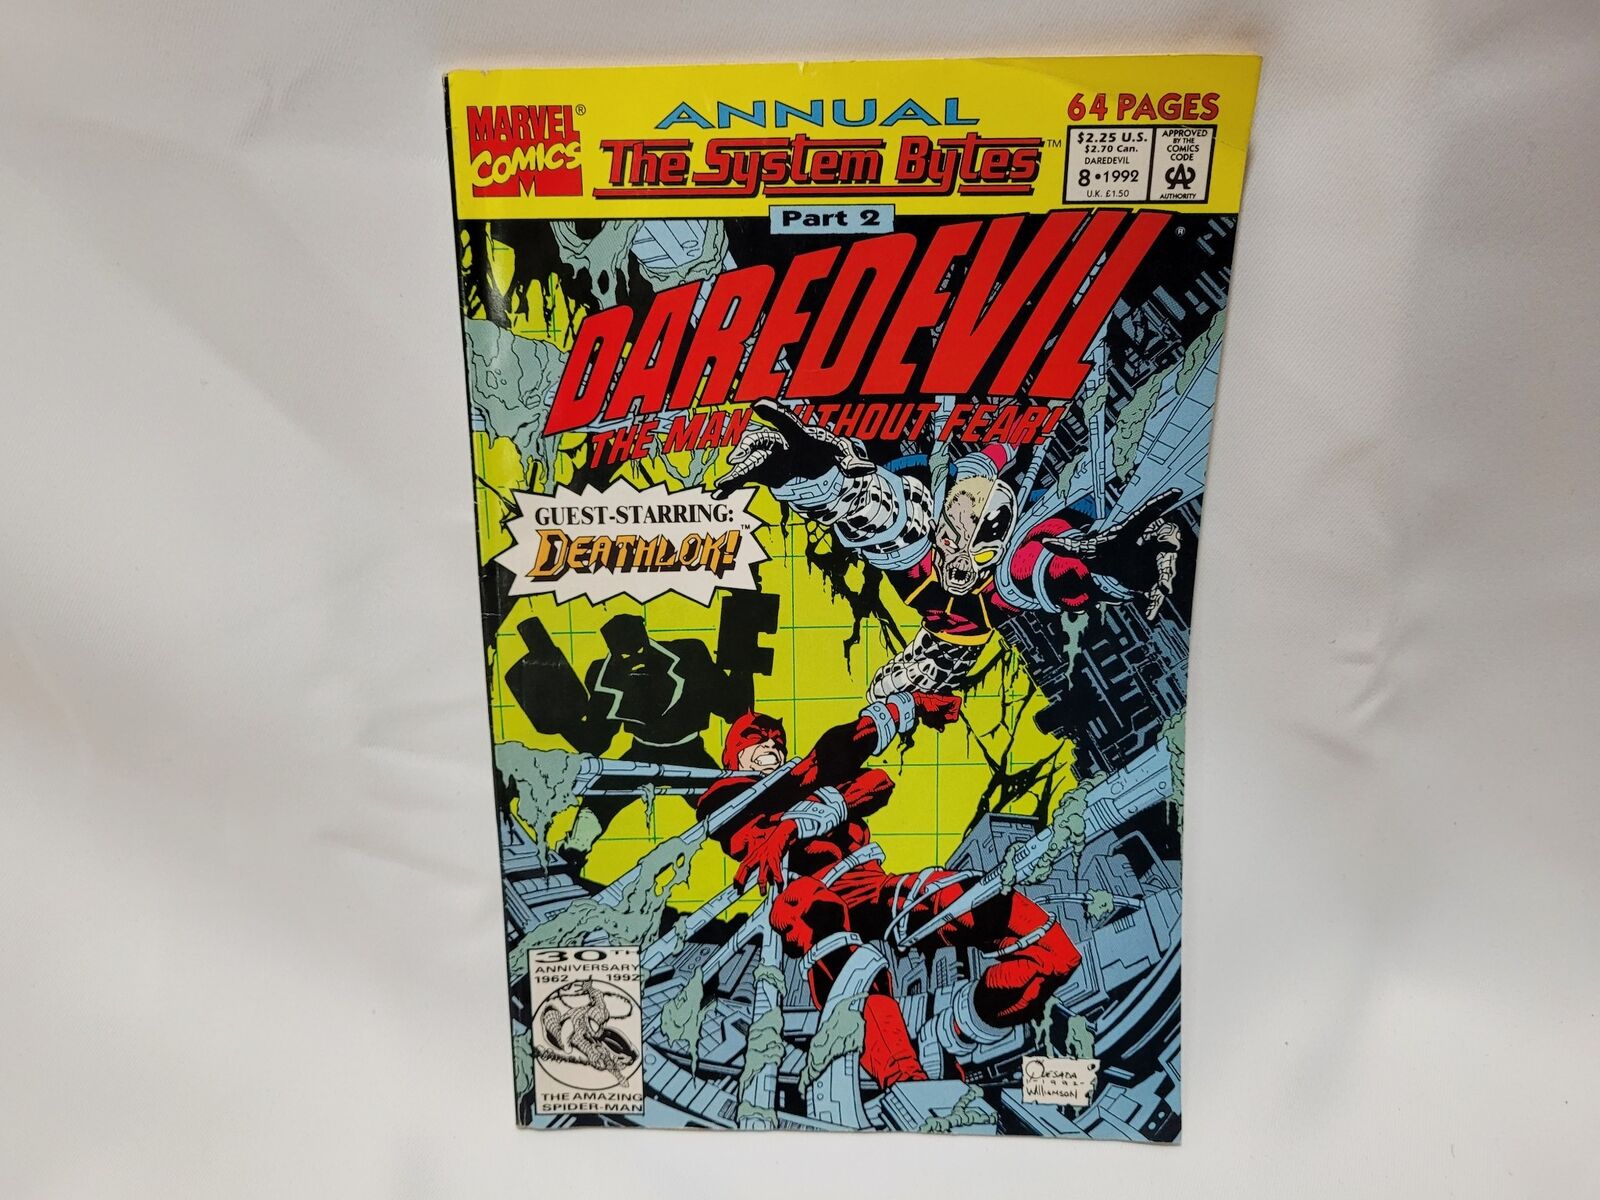 Daredevil Annual Number 8 Comic Book 1992 The System Bytes Part 2 Marvel Comics